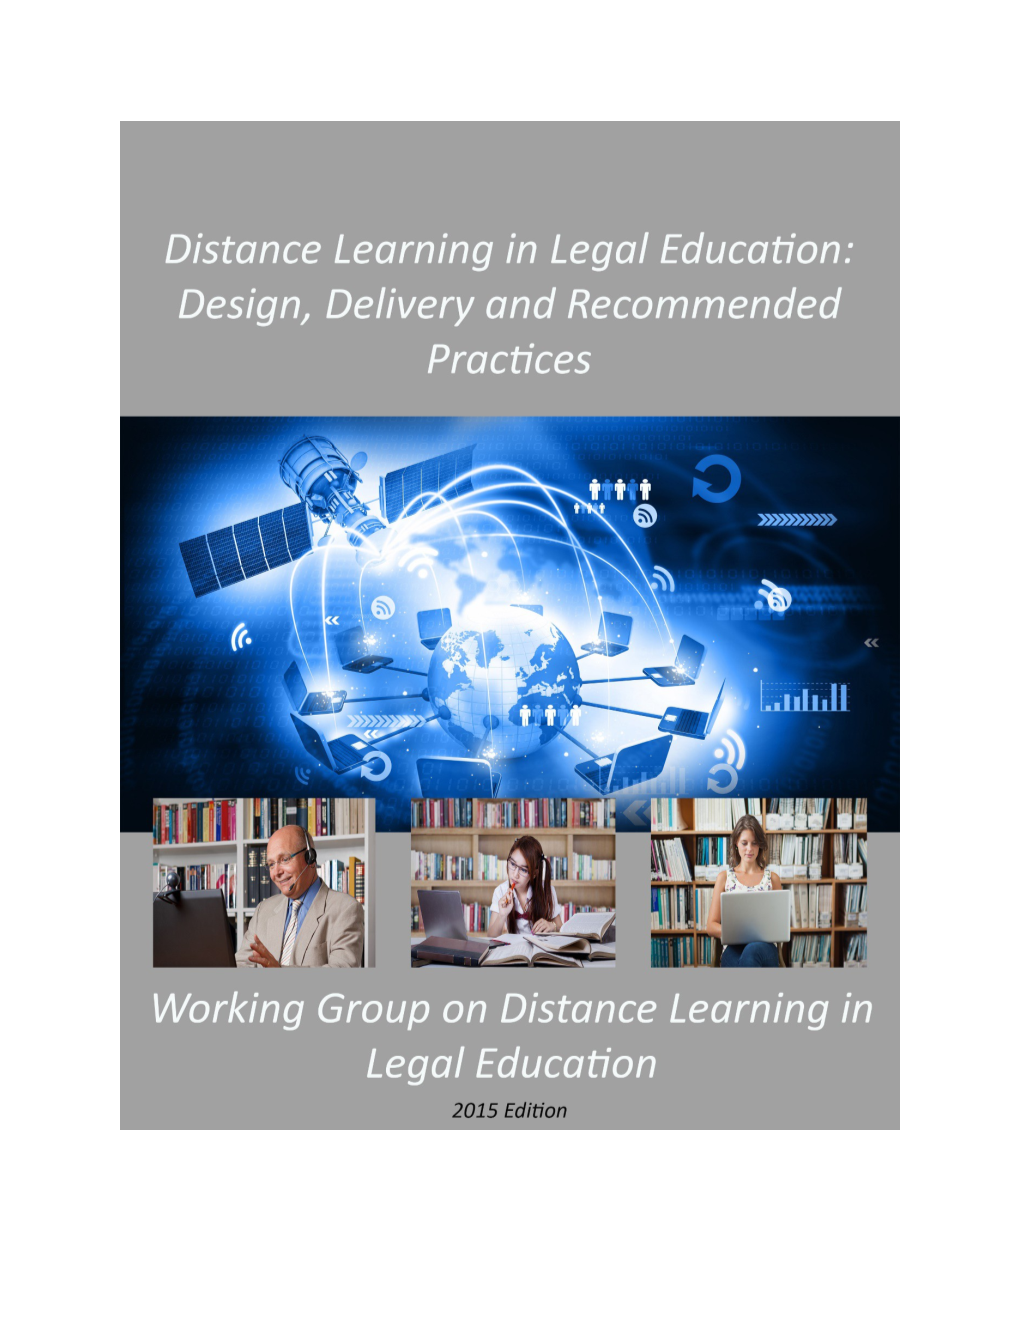 Distance Learning in Legal Education: Design, Delivery and Recommended Practices